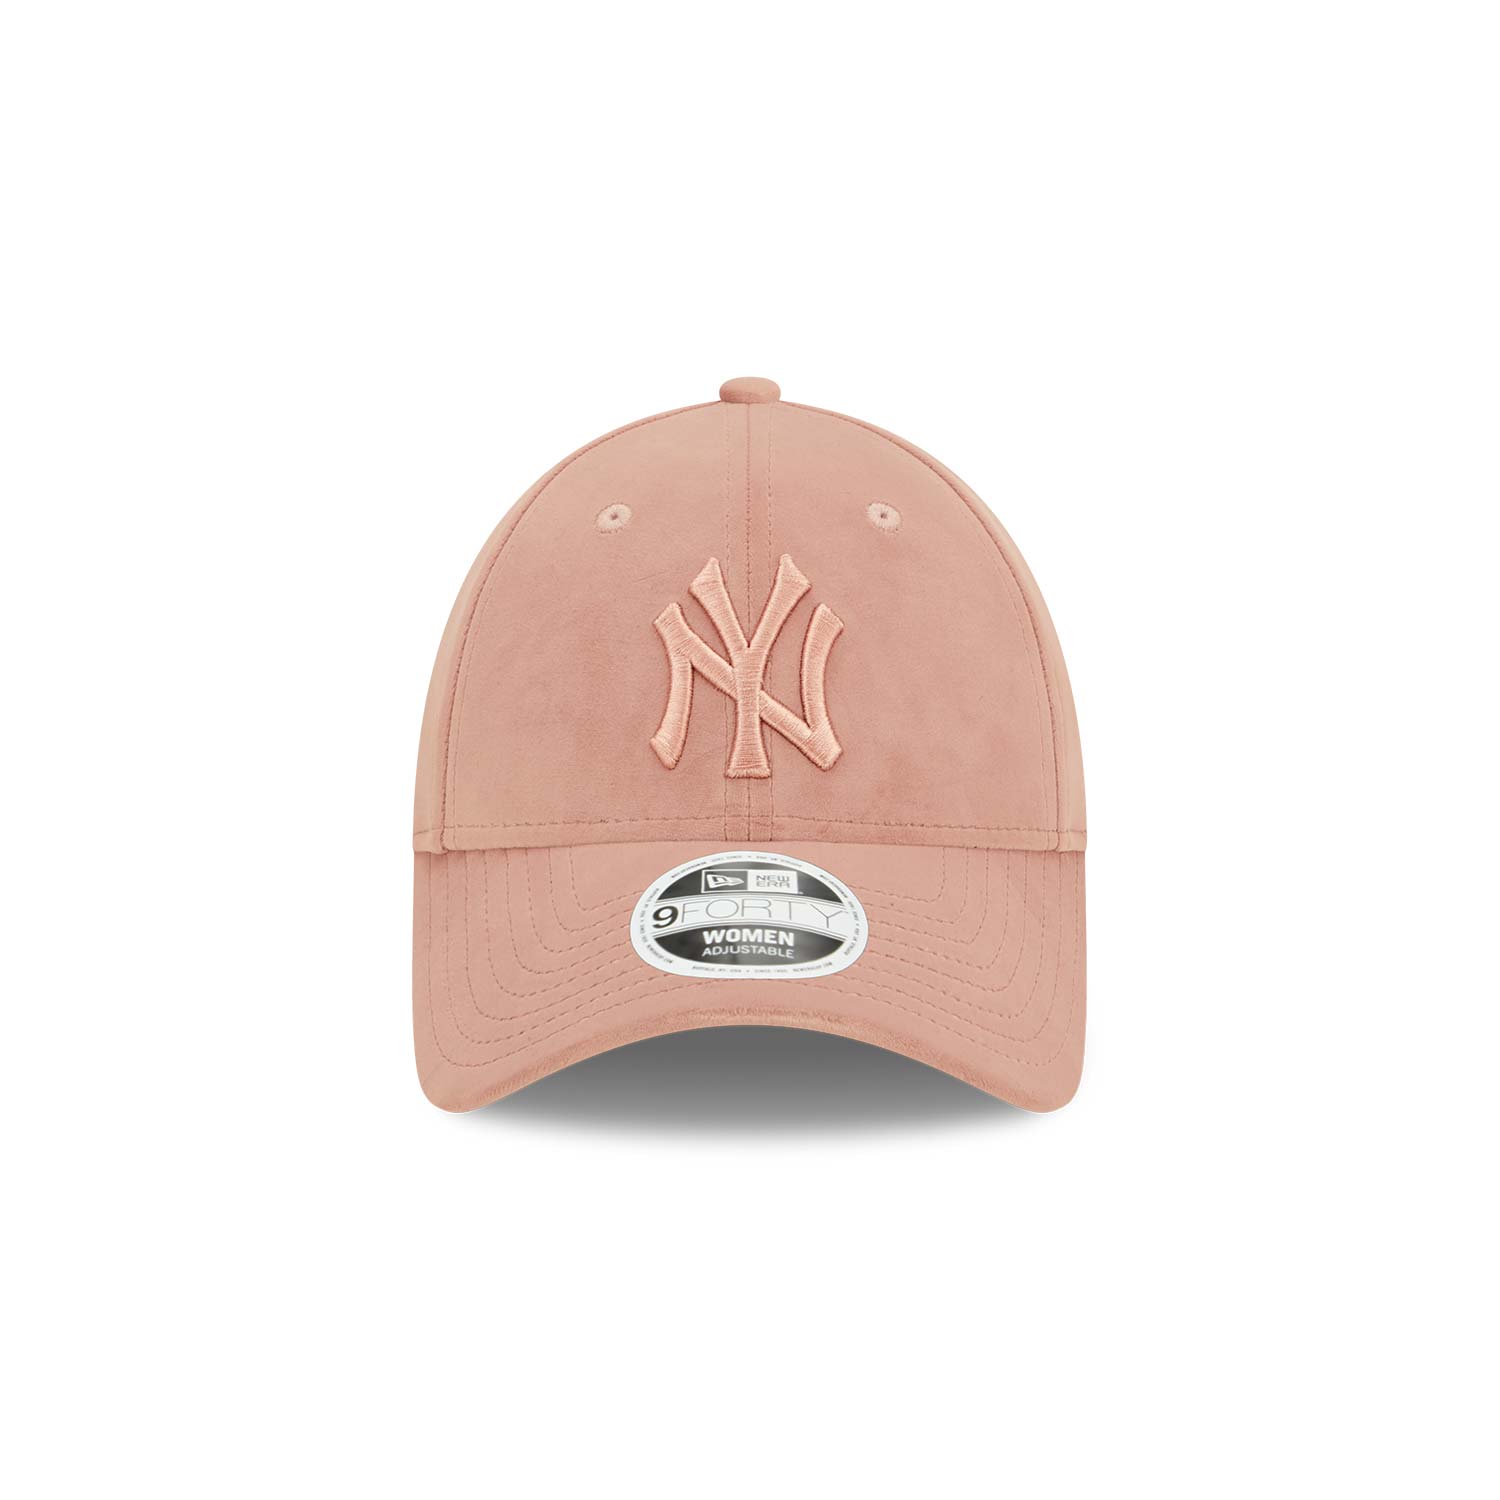 Official New Era New York Yankees Pink 9FORTY Womens Cap B8652_3